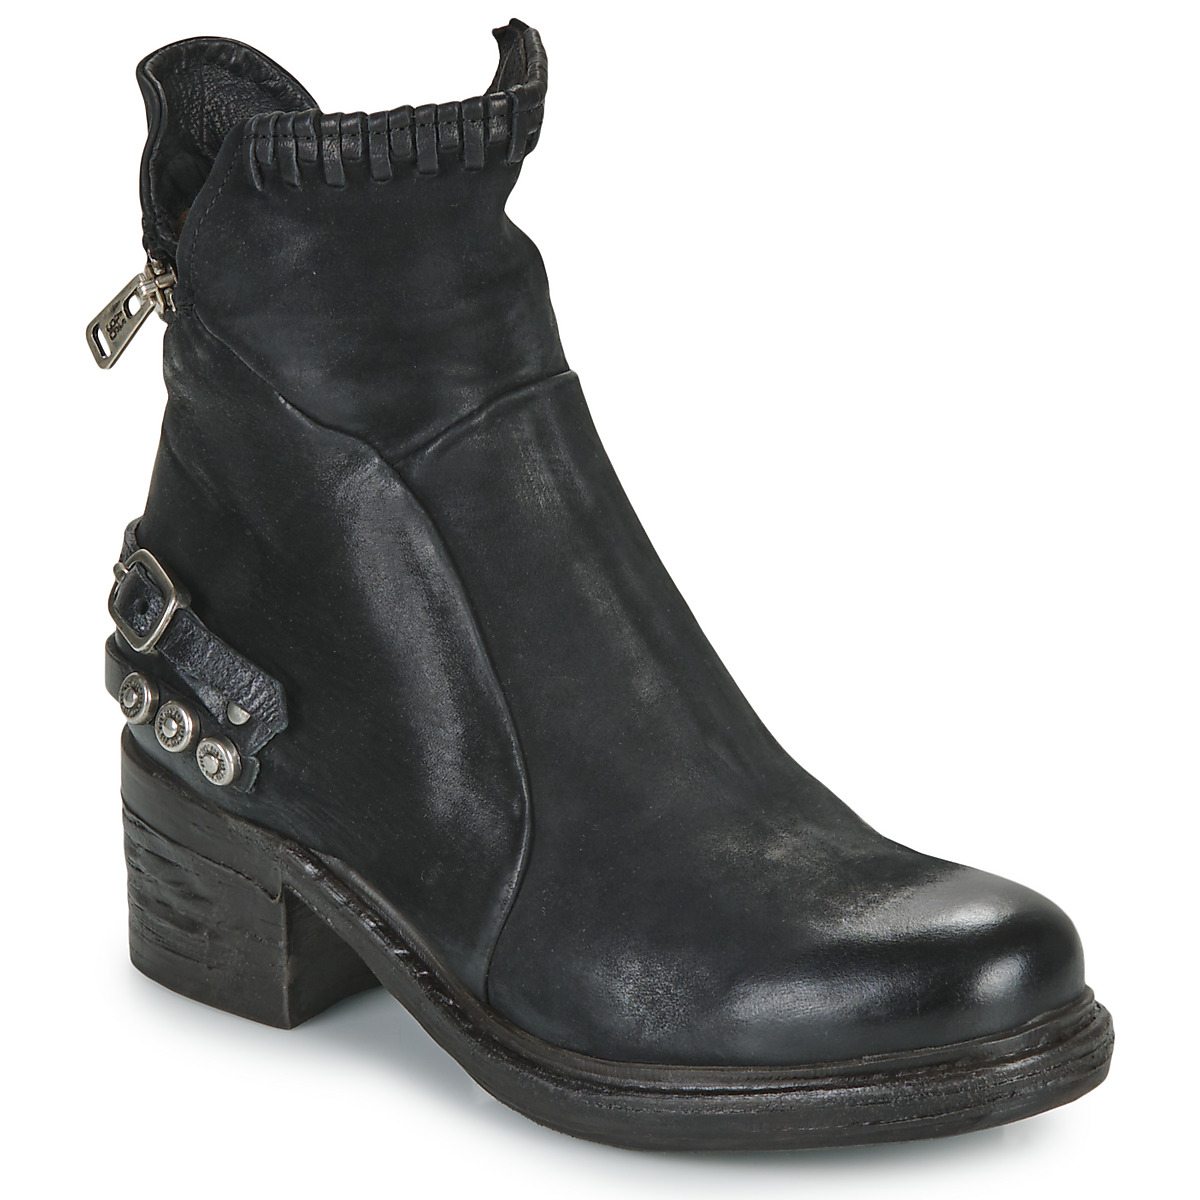 airstep / a.s.98  nova 17  women's mid boots in black